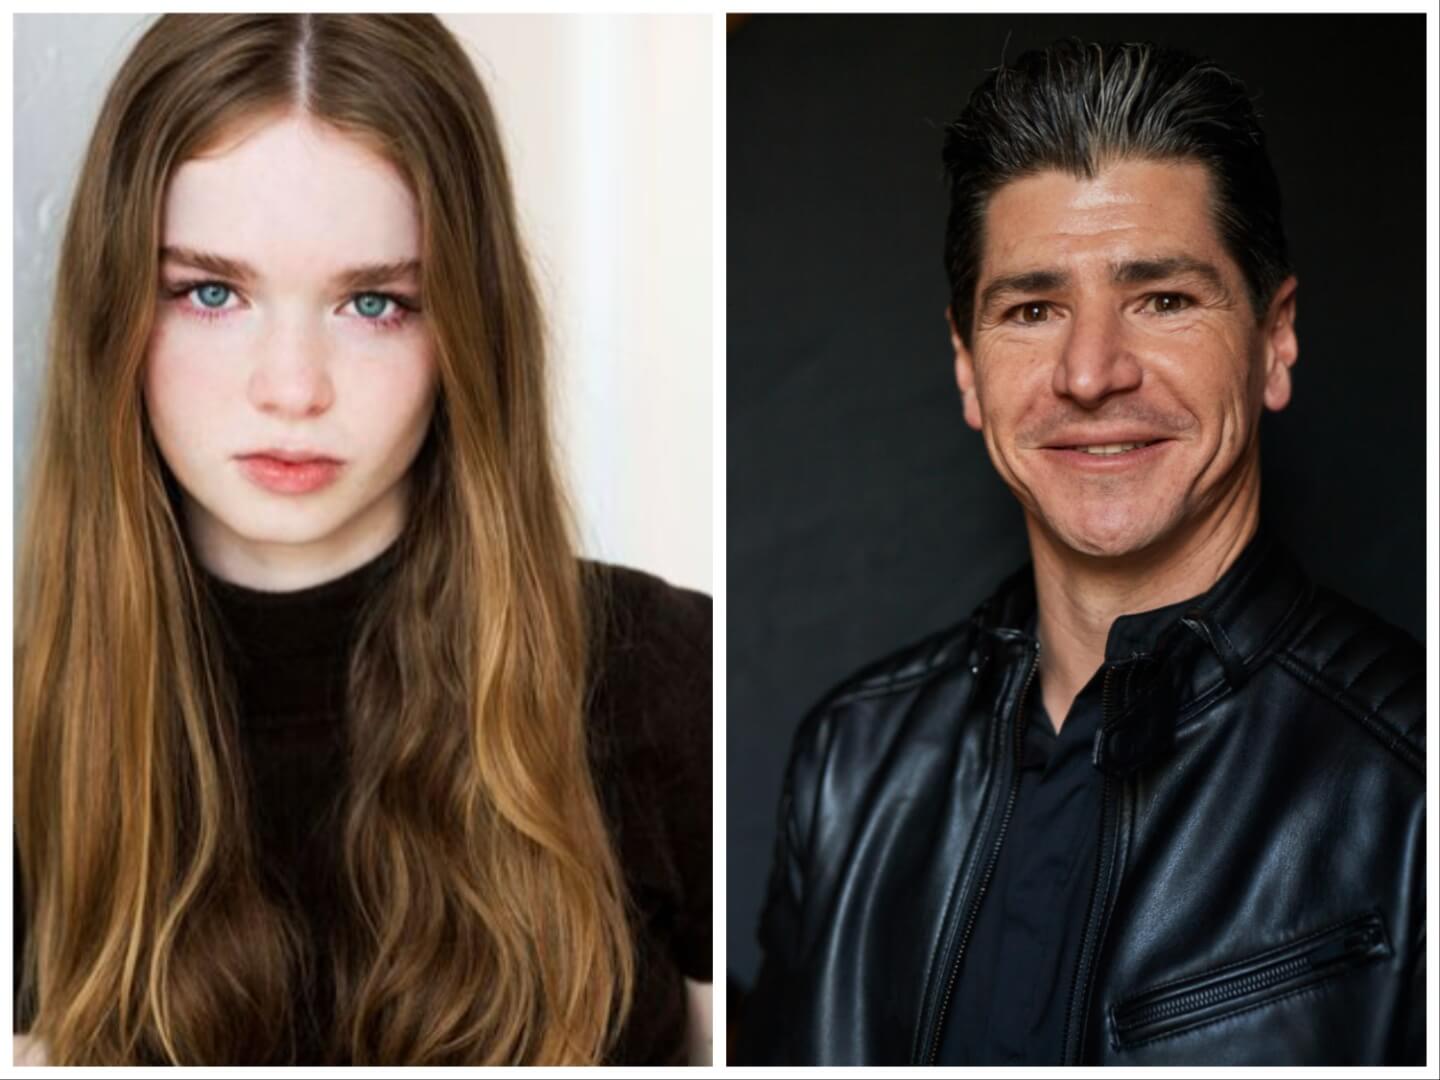 'Abducted by My Teacher' stars Summer Howell and Michael Fishman